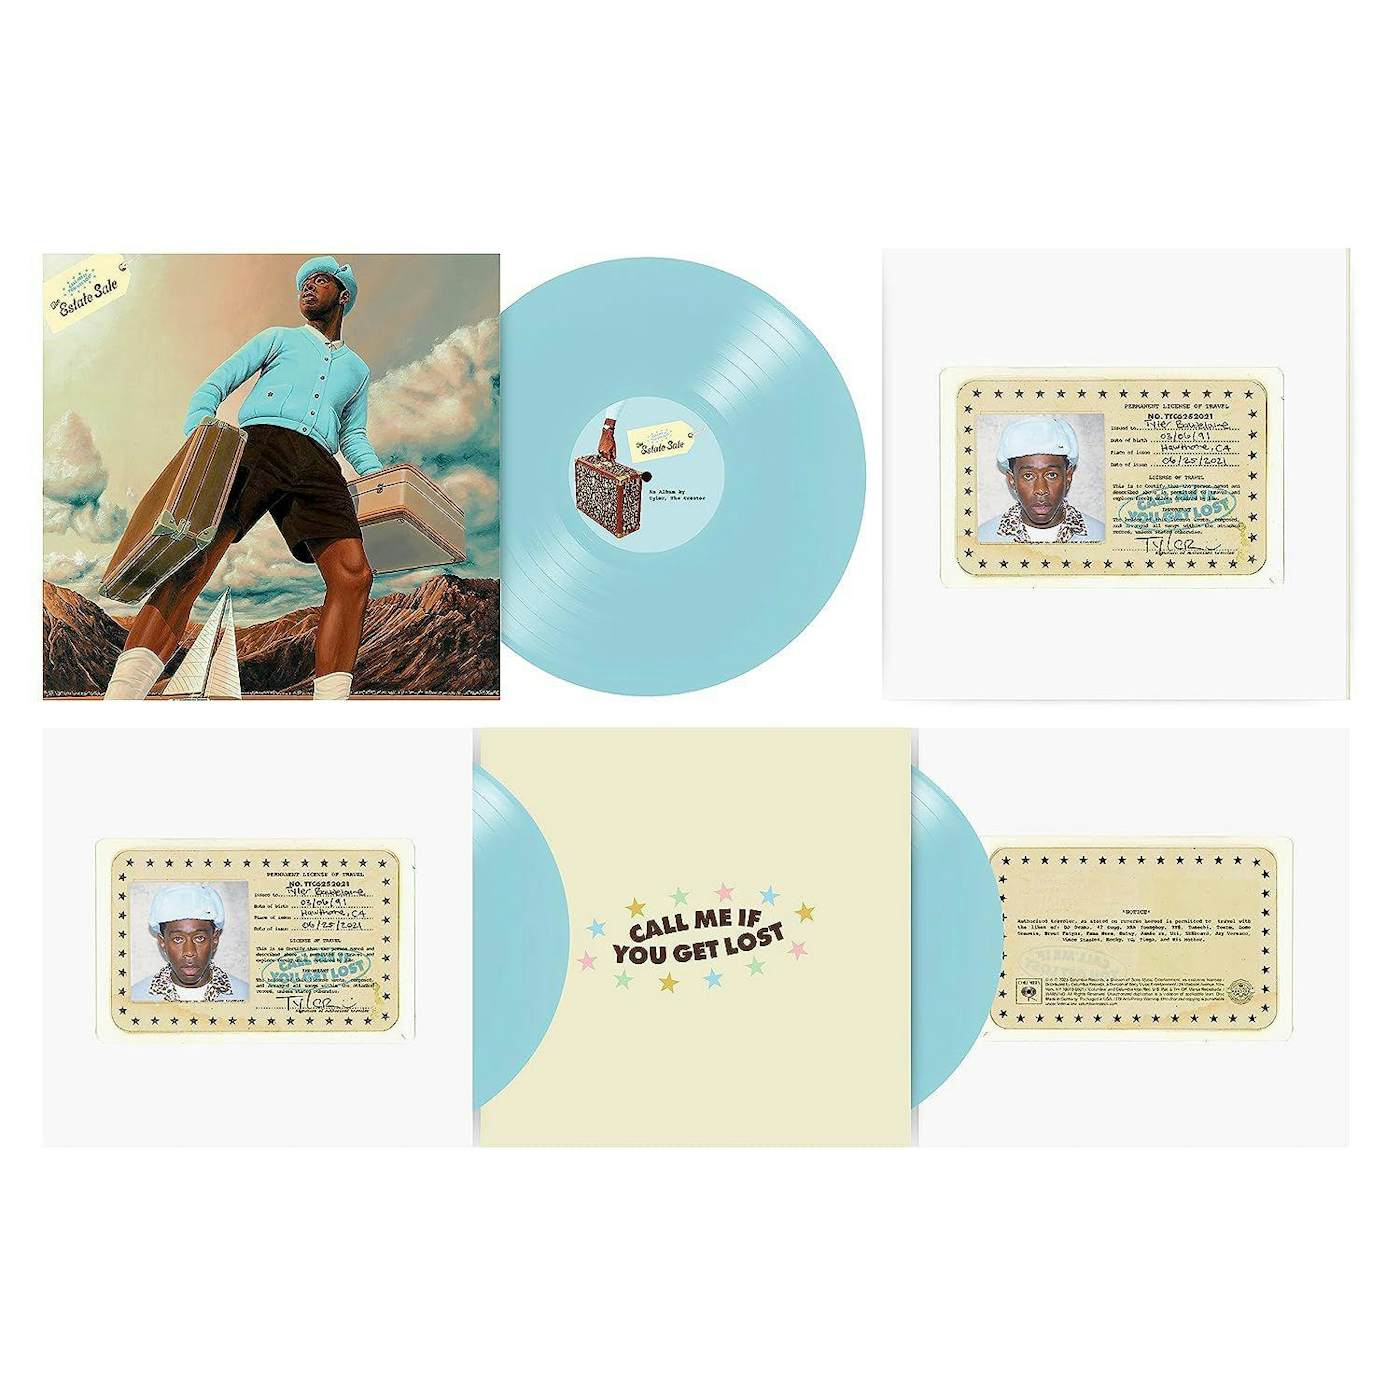 Tyler, The Creator - Wolf (Pink Vinyl) – Rustic Records